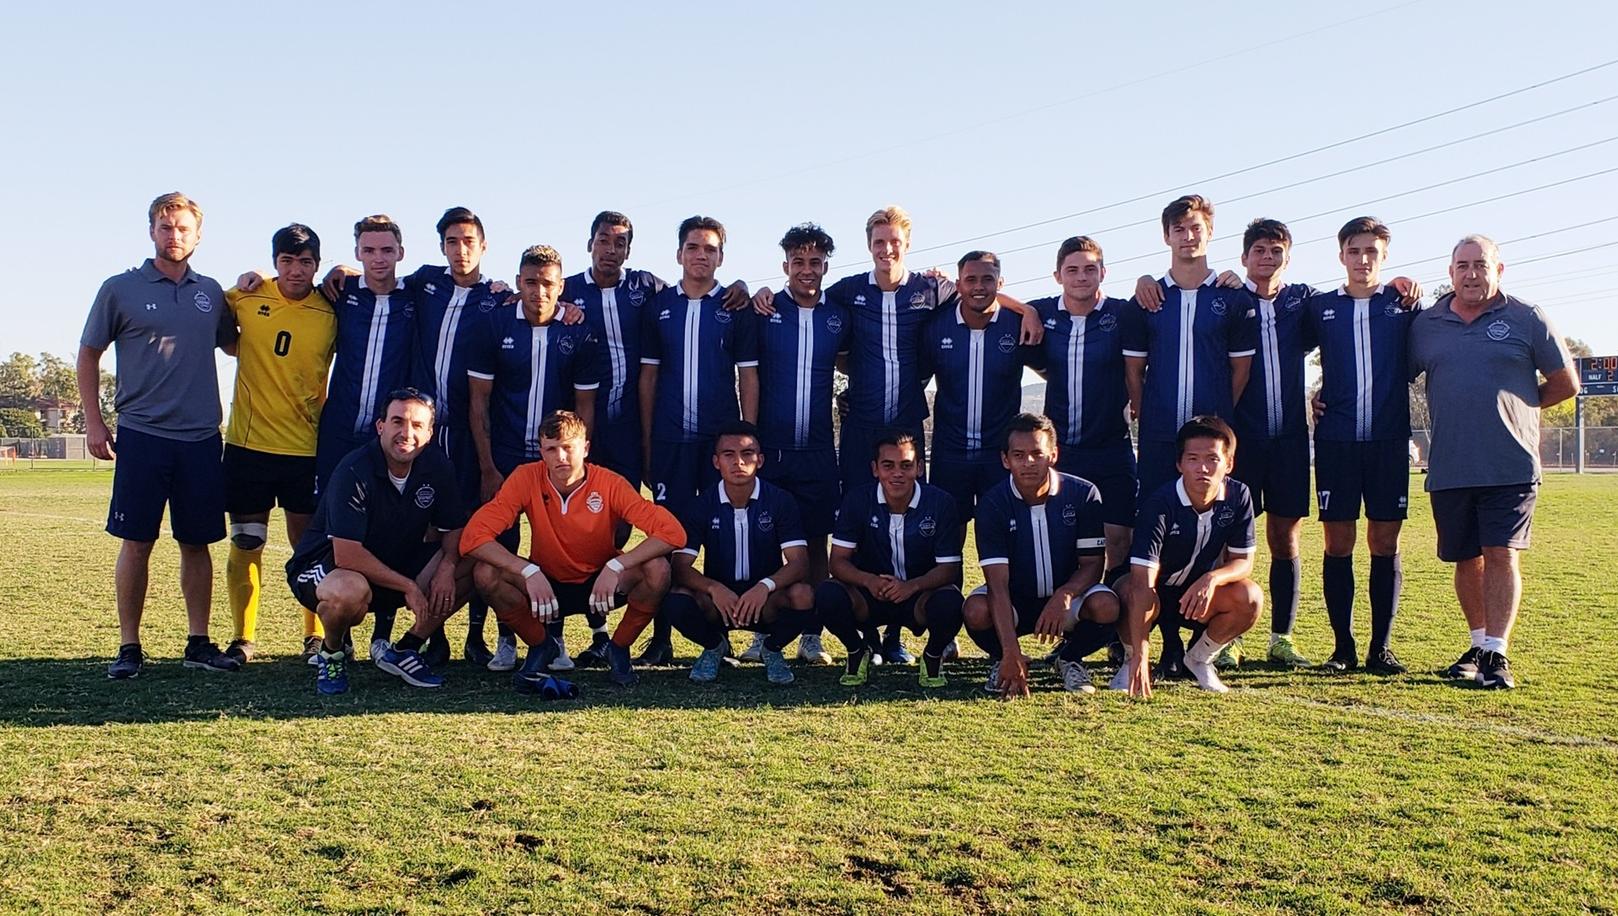 Men's soccer team wins its way into the regional playoffs